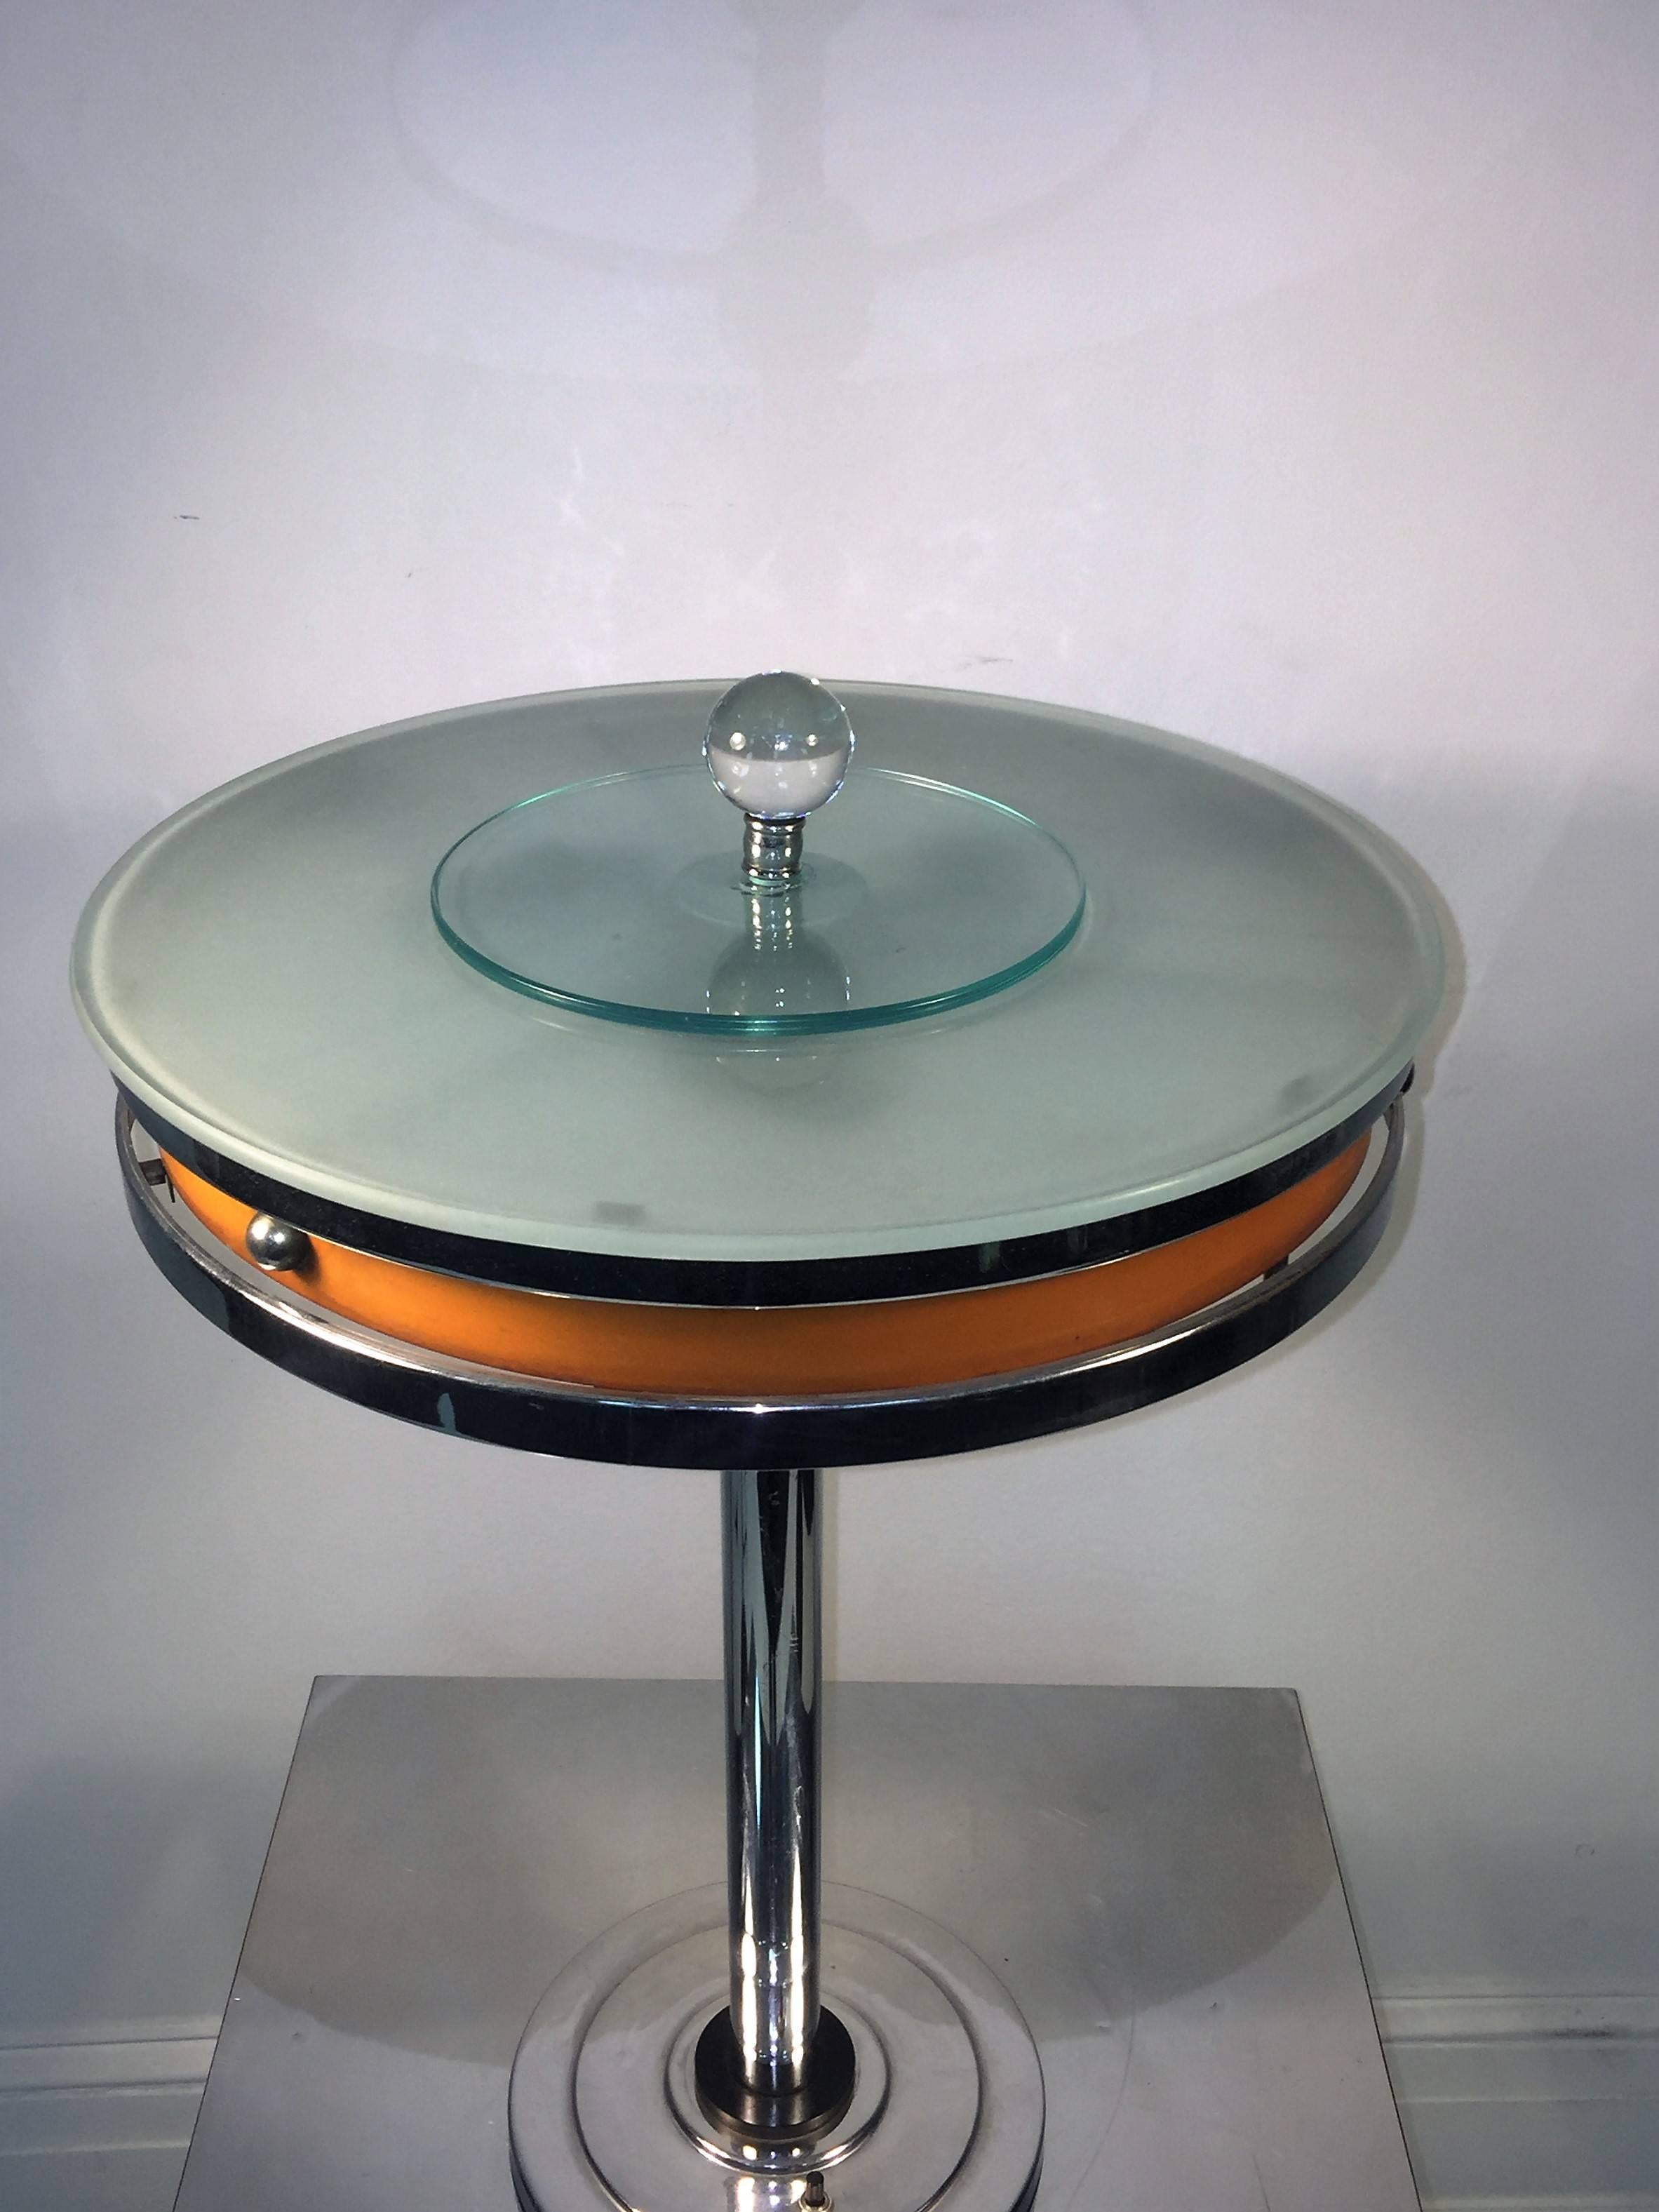 Rare Kurt Versen Art Deco Table Lamp In Excellent Condition For Sale In Mount Penn, PA